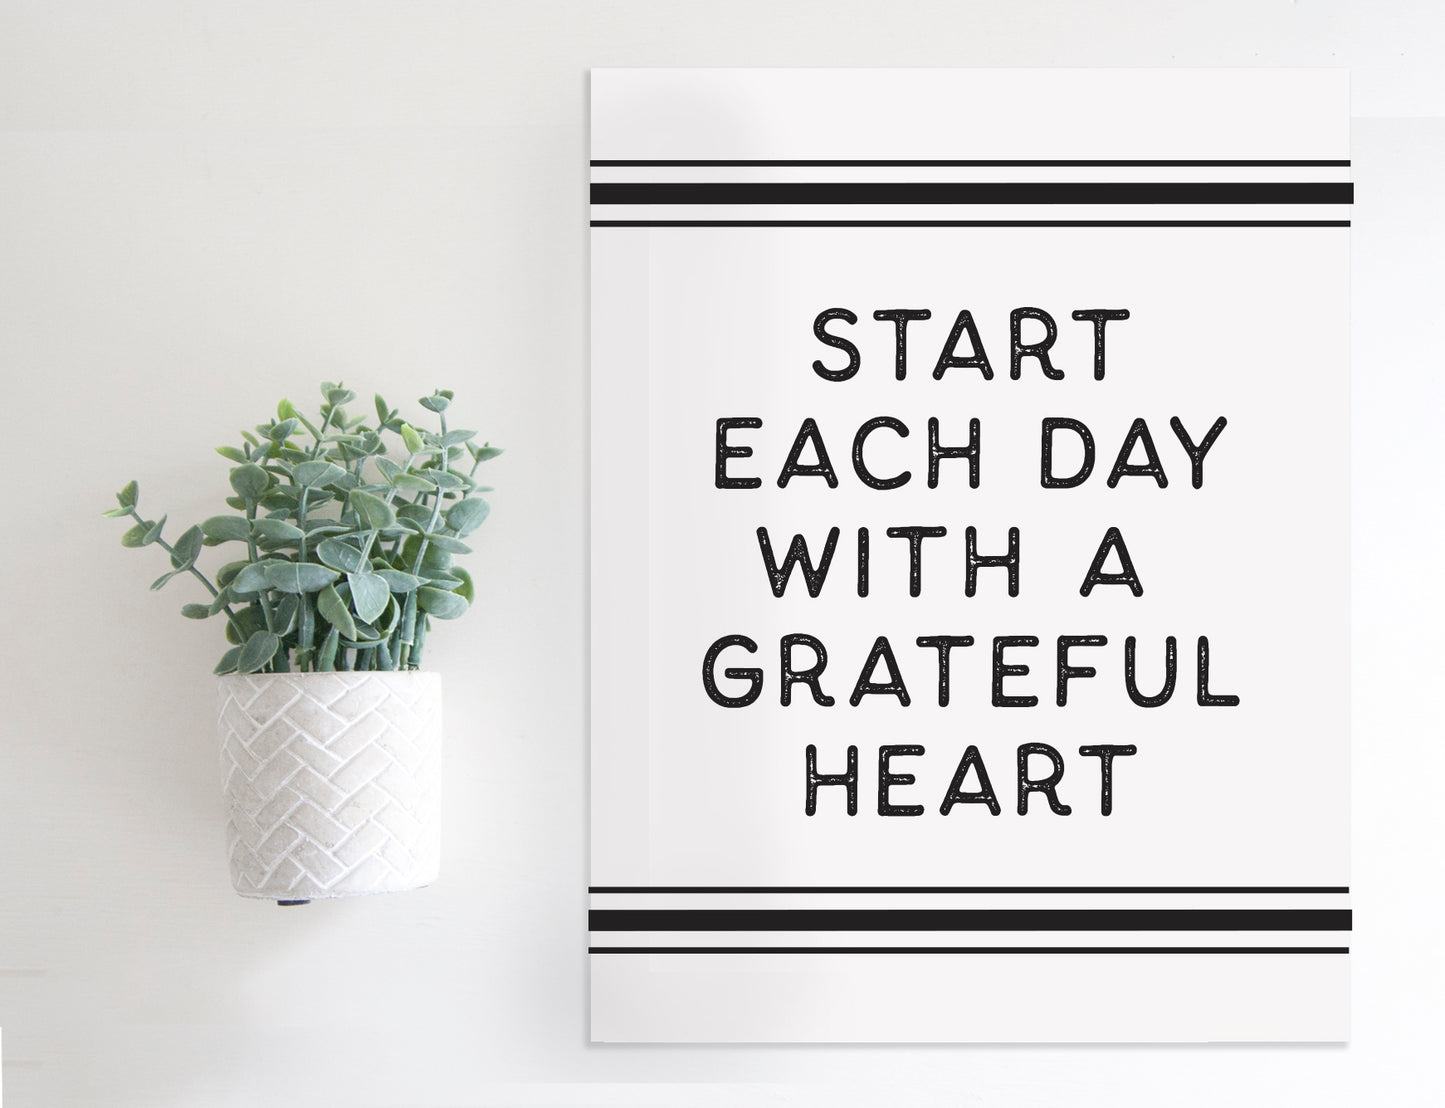 Magnetic Wall Hanging Insert: Grateful Heart | INSERT ONLY